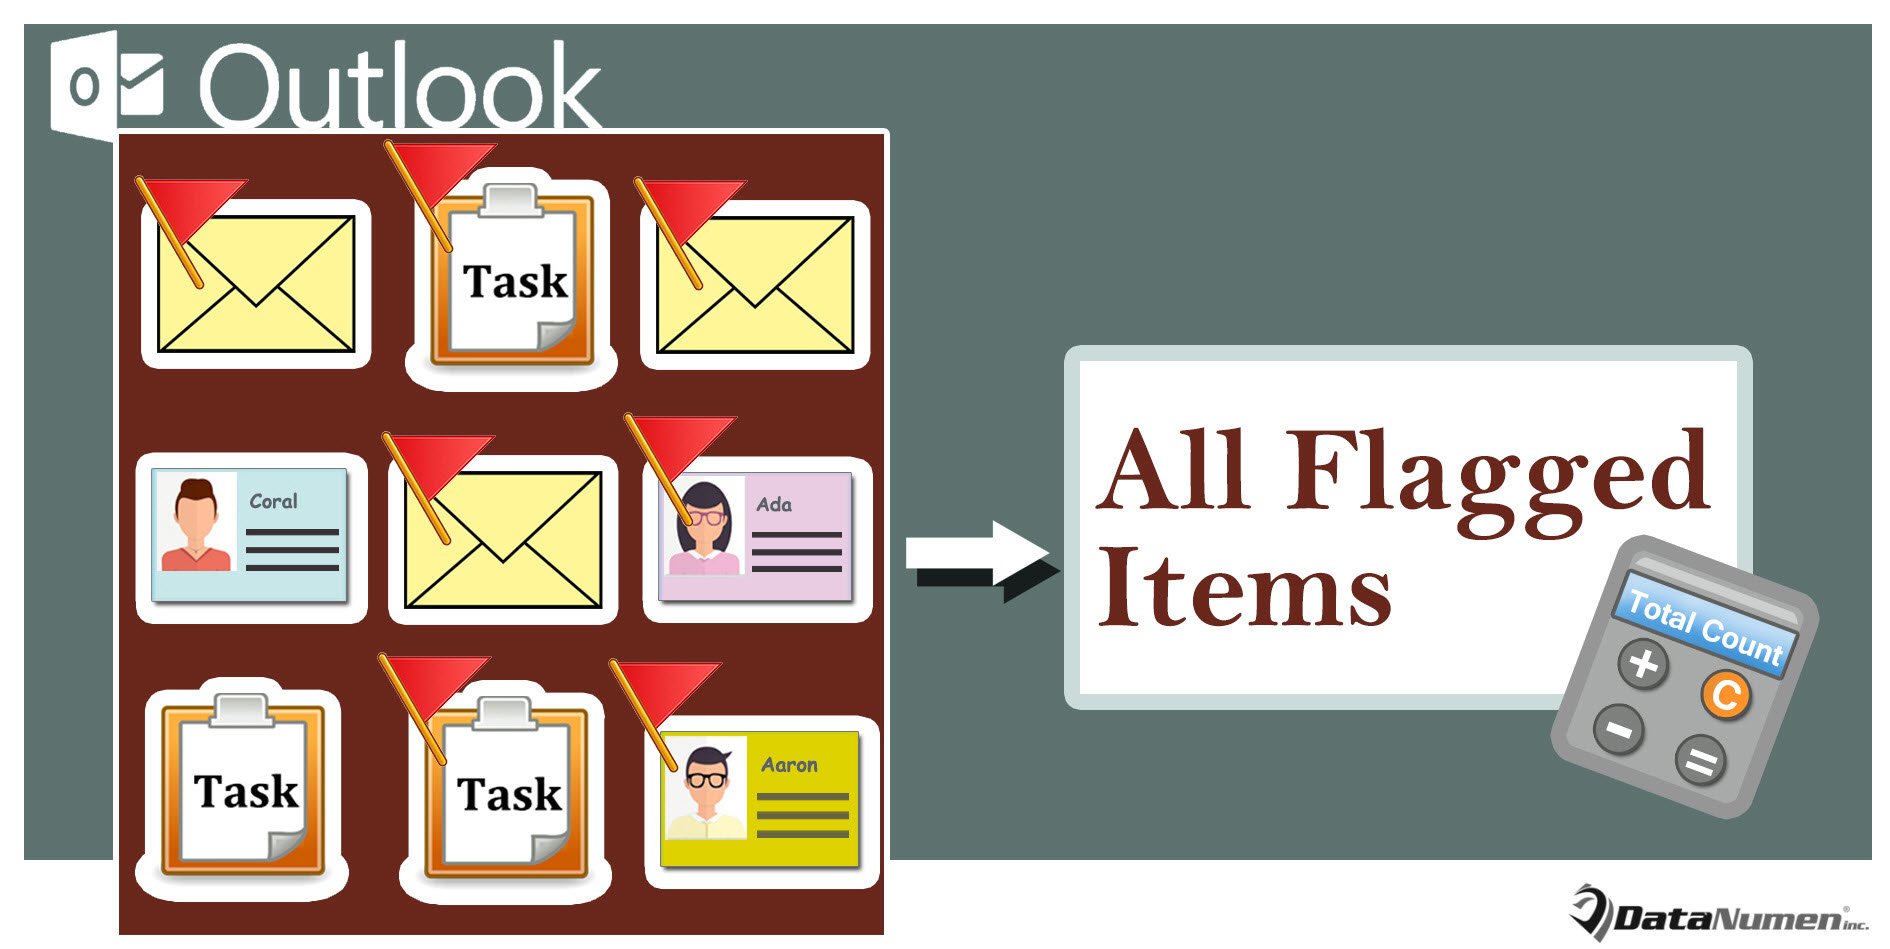 Count All Flagged Items in Your Outlook